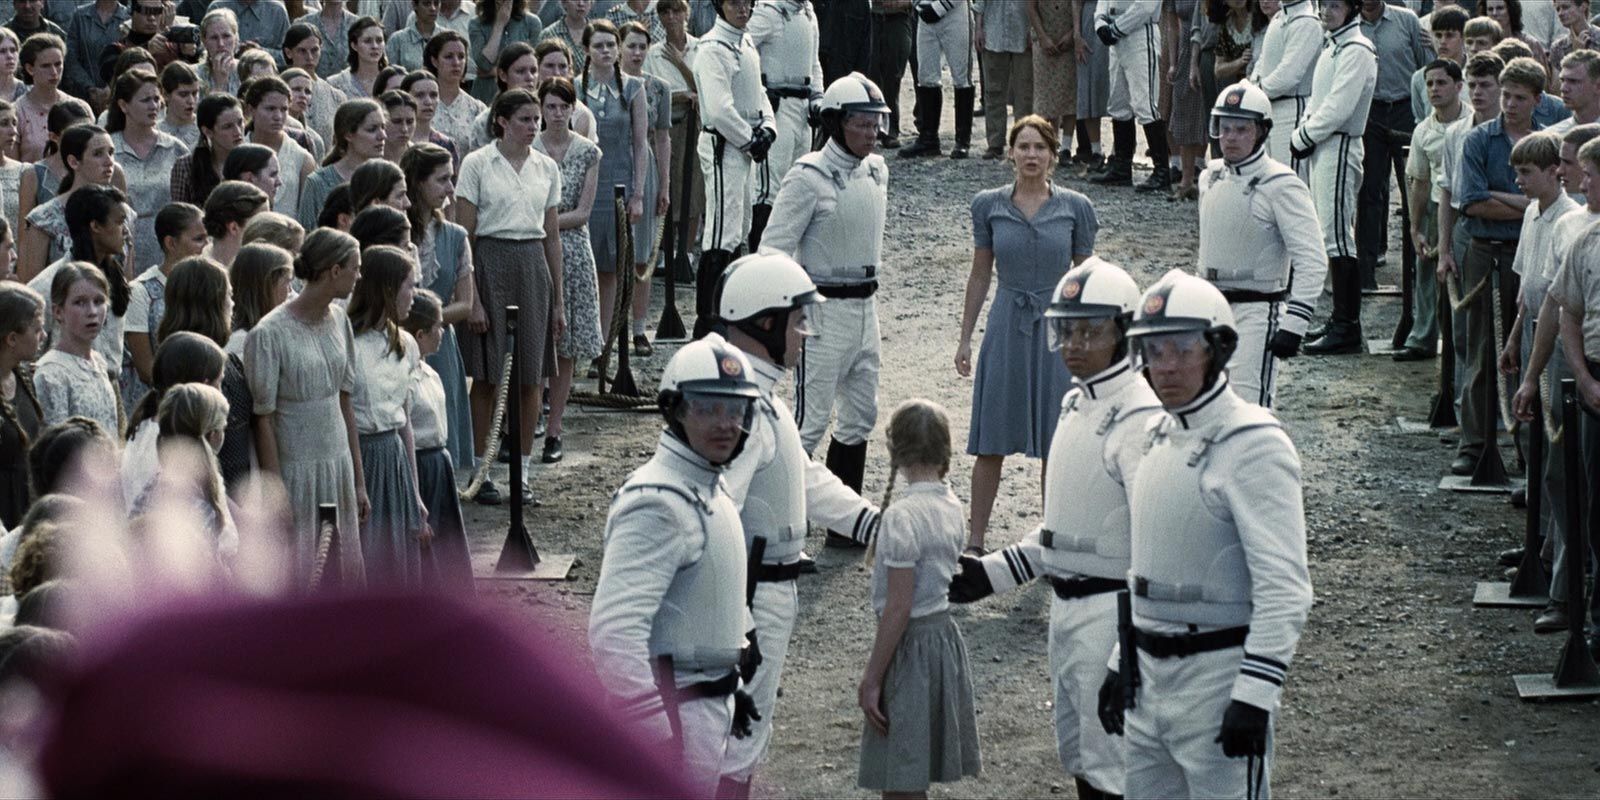 An image of Katniss volunteering in The Hunger Games